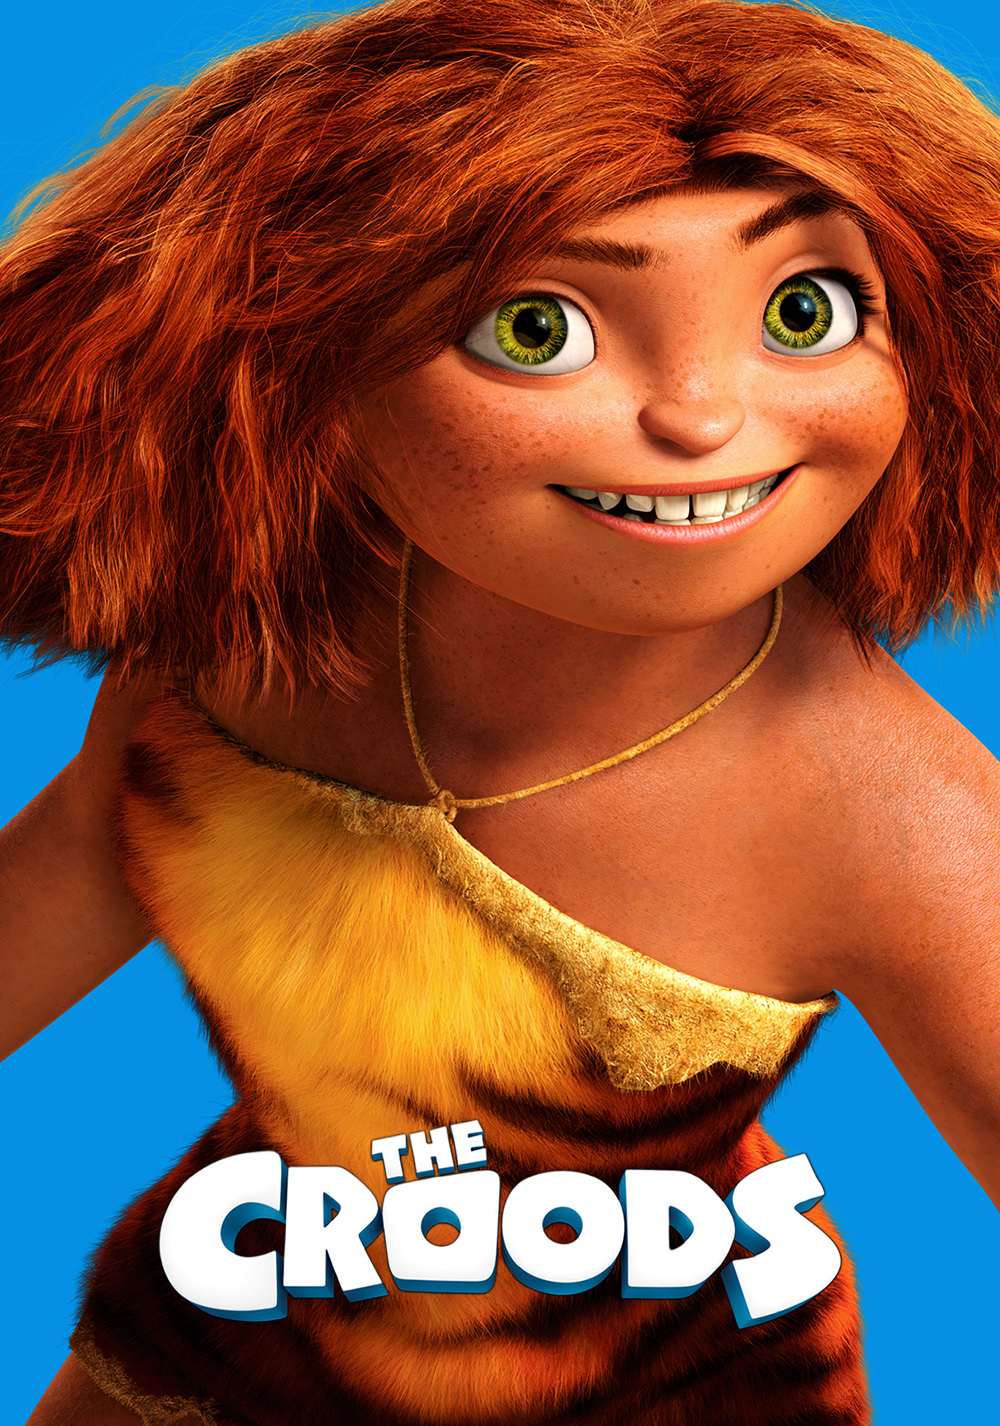 The Croods Picture - Image Abyss